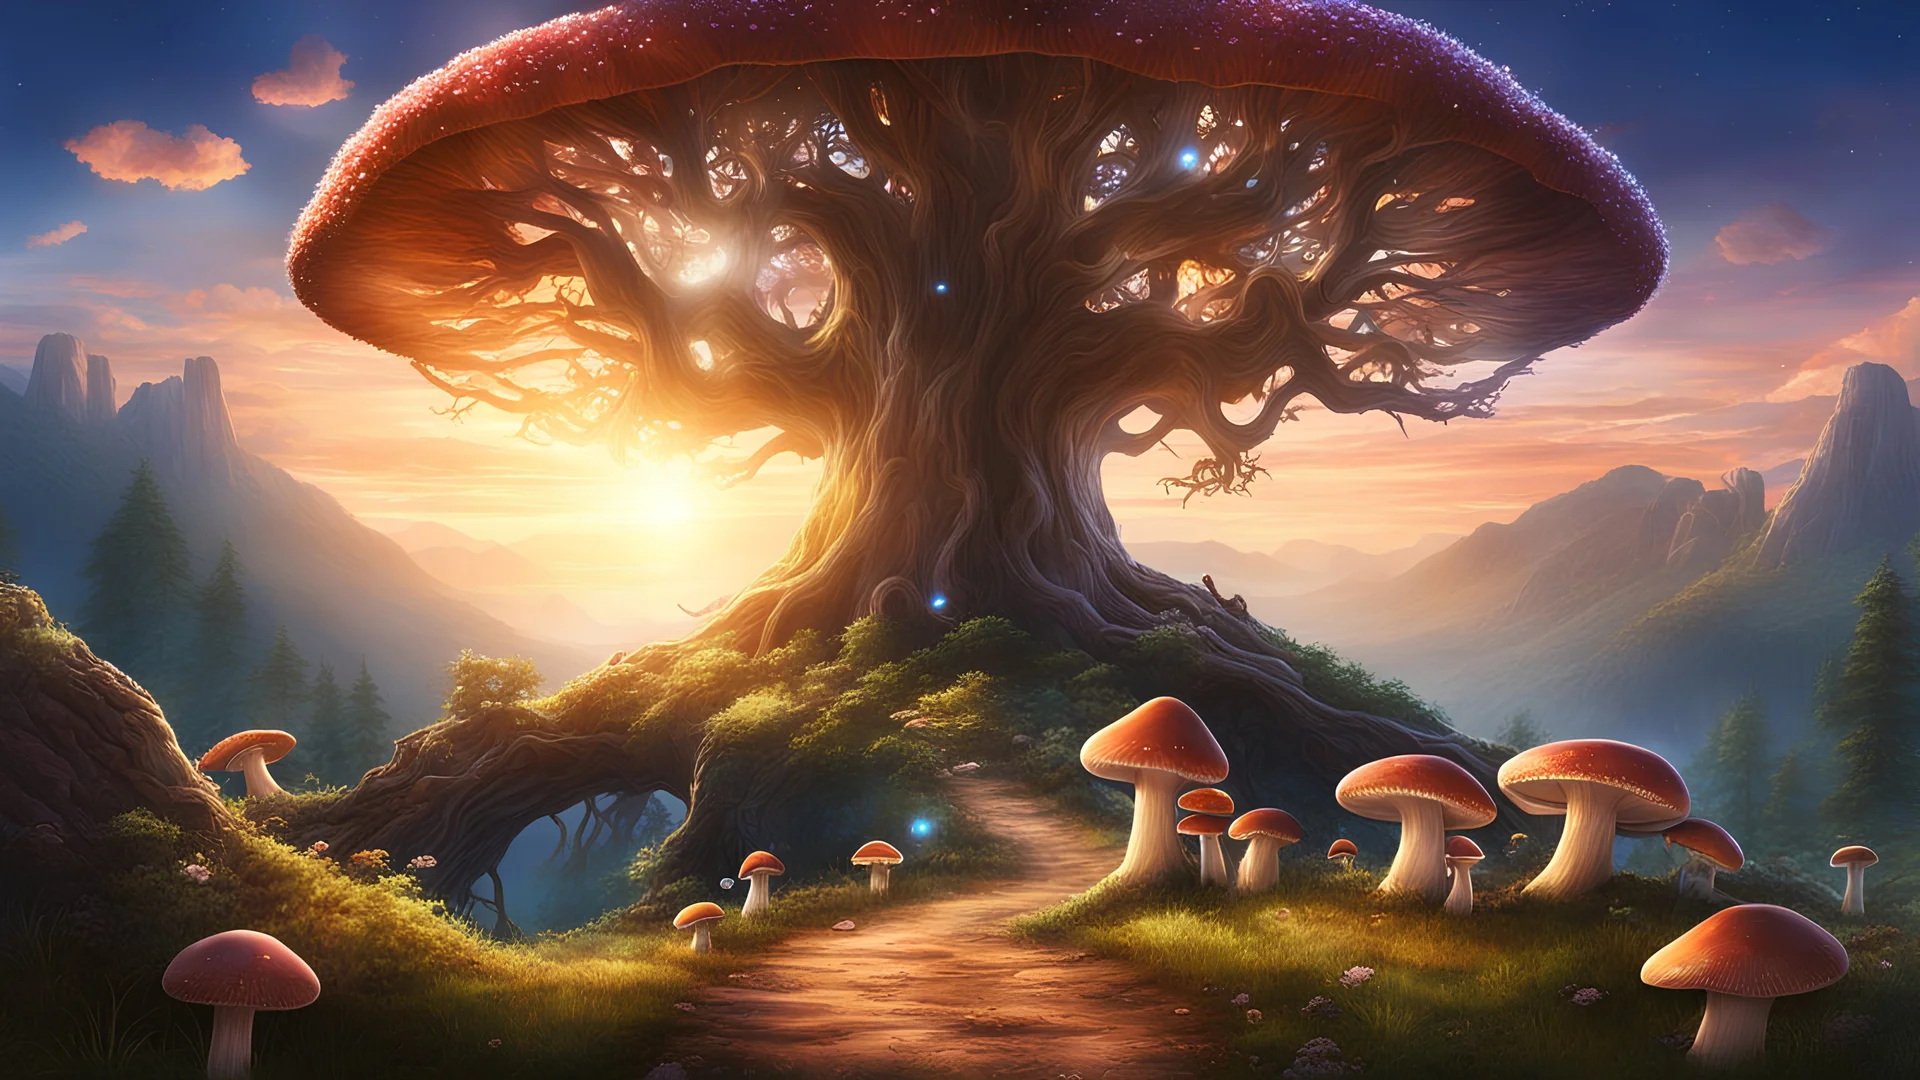 A dreamy landscape with mushrooms and a old, huge tree in the center. Fantasy roads of light going towards the tree. The sun is going down behind the tree. Mountains in the background. Digital Art, Masterpiece. Fantasy. Dream. Dreamy. Surreal.